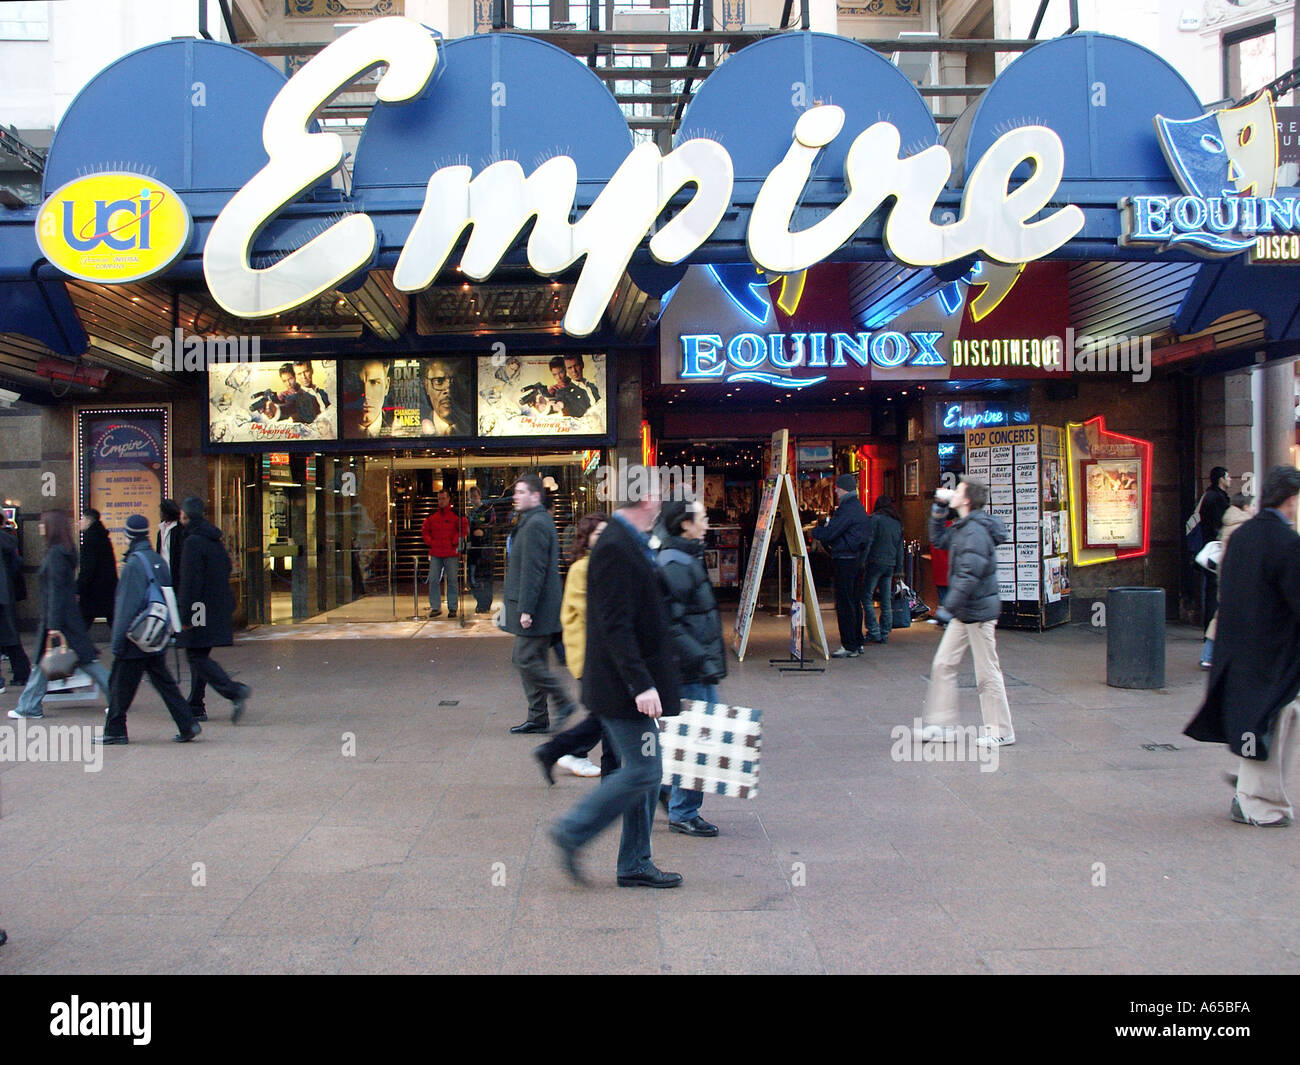 Empire UCI cinema main entrance to premises circa 2002 Equinox Discotheque dance hall nightclub venue in Leicester Square West End  London England UK Stock Photo